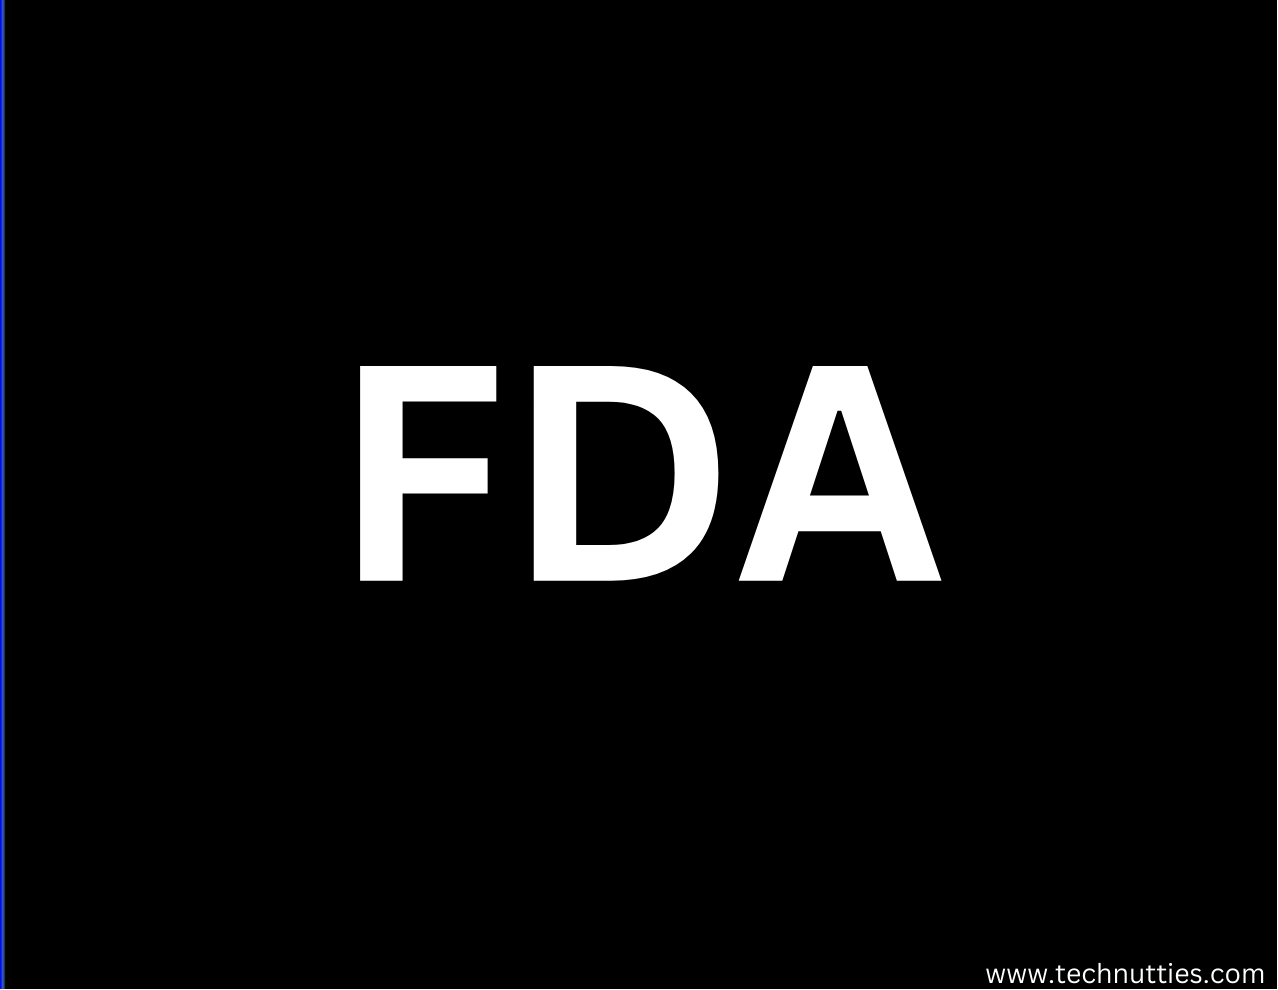 FDA is an agency of the Department of Health and Human Services and is responsible for regulating and supervising the safety of food and dietary supplements, drugs, vaccines, biological medical products, blood products, radiation-emitting devices, veterinary products, and cosmetics.